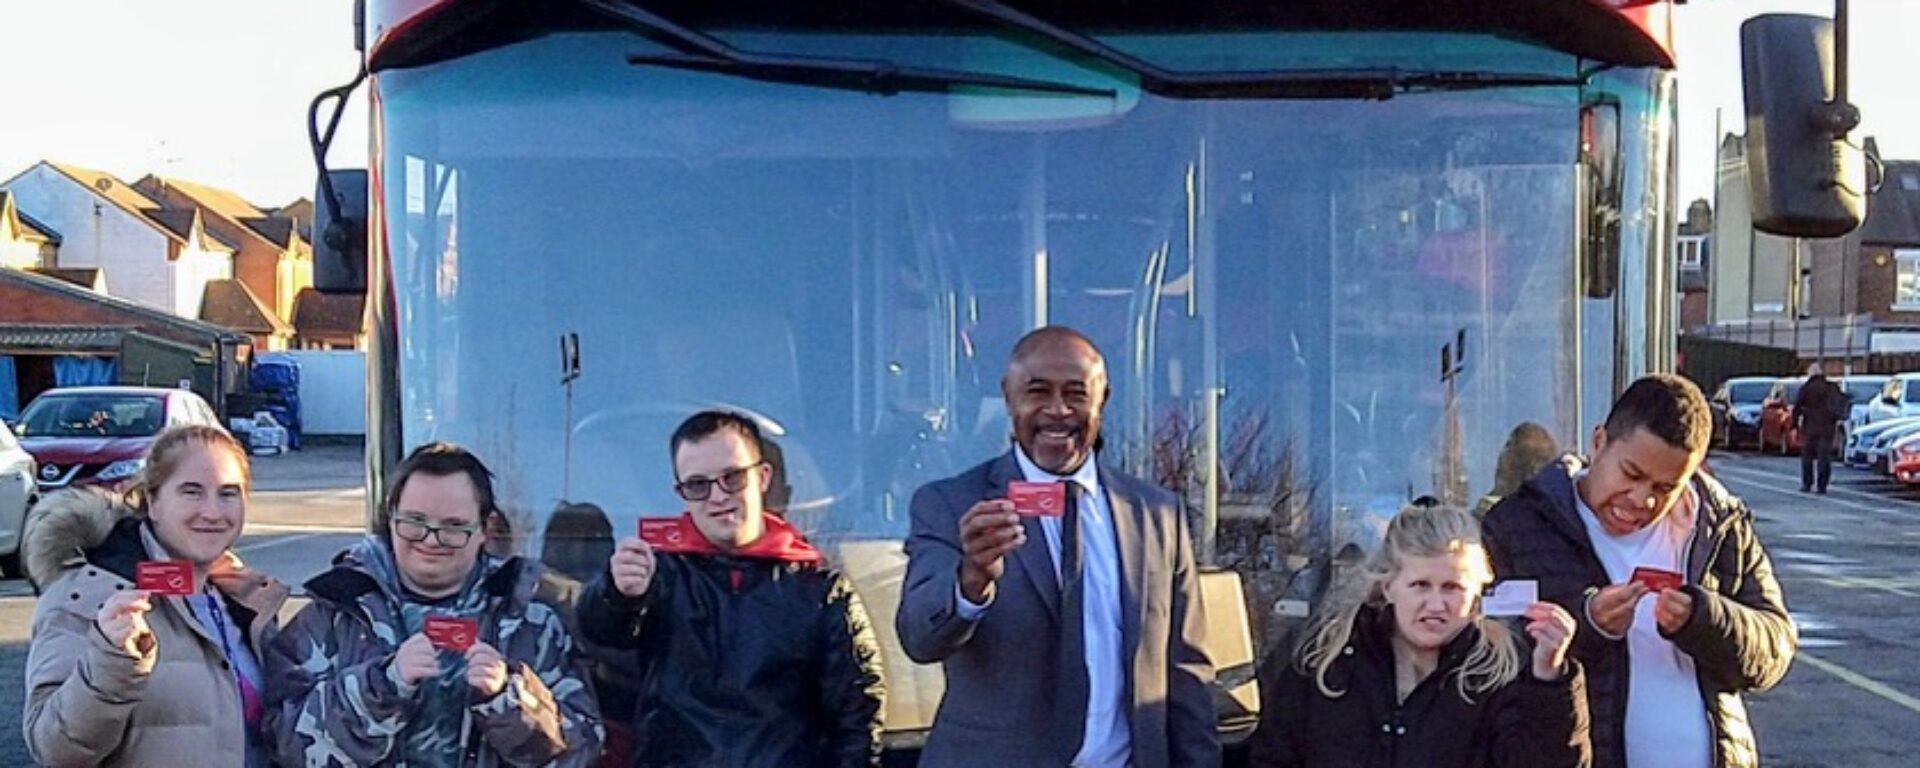 transdev-uk-supports-special-students-free-travel-independent-future